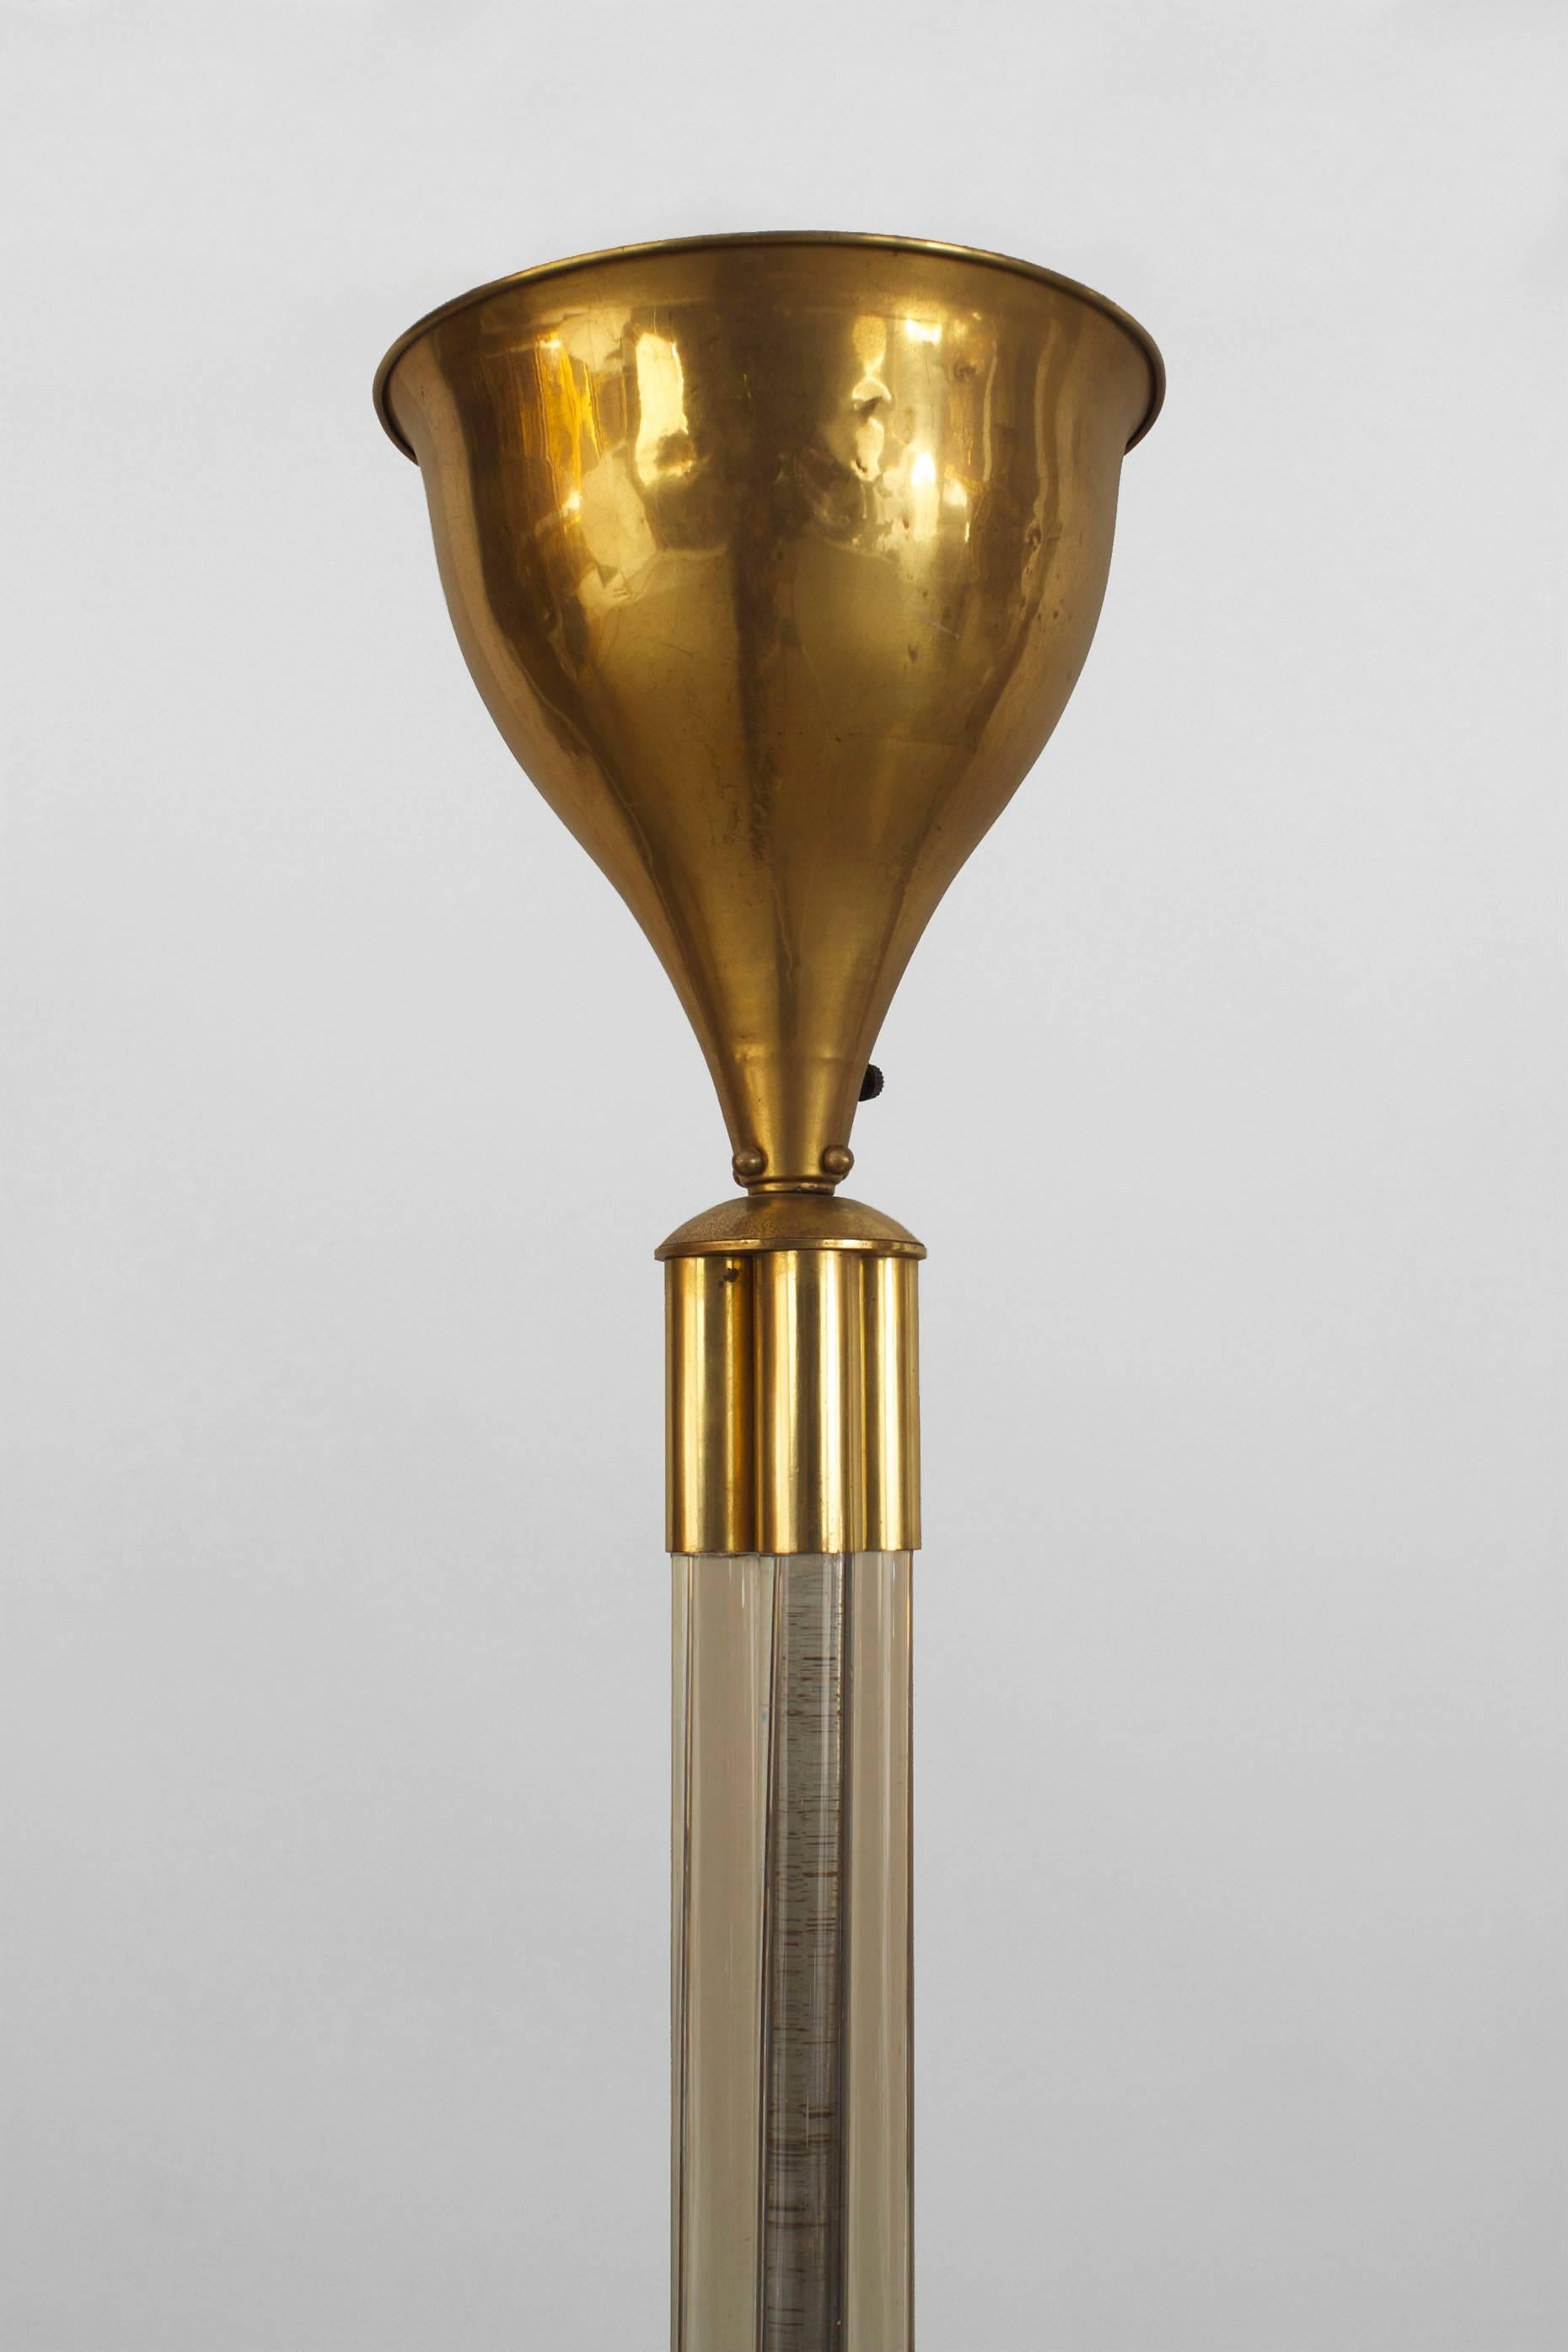 French Art Deco (circa 1930) floor lamp with gilded brass base and uplight and a shaft of 4 tubular lucite rods.
